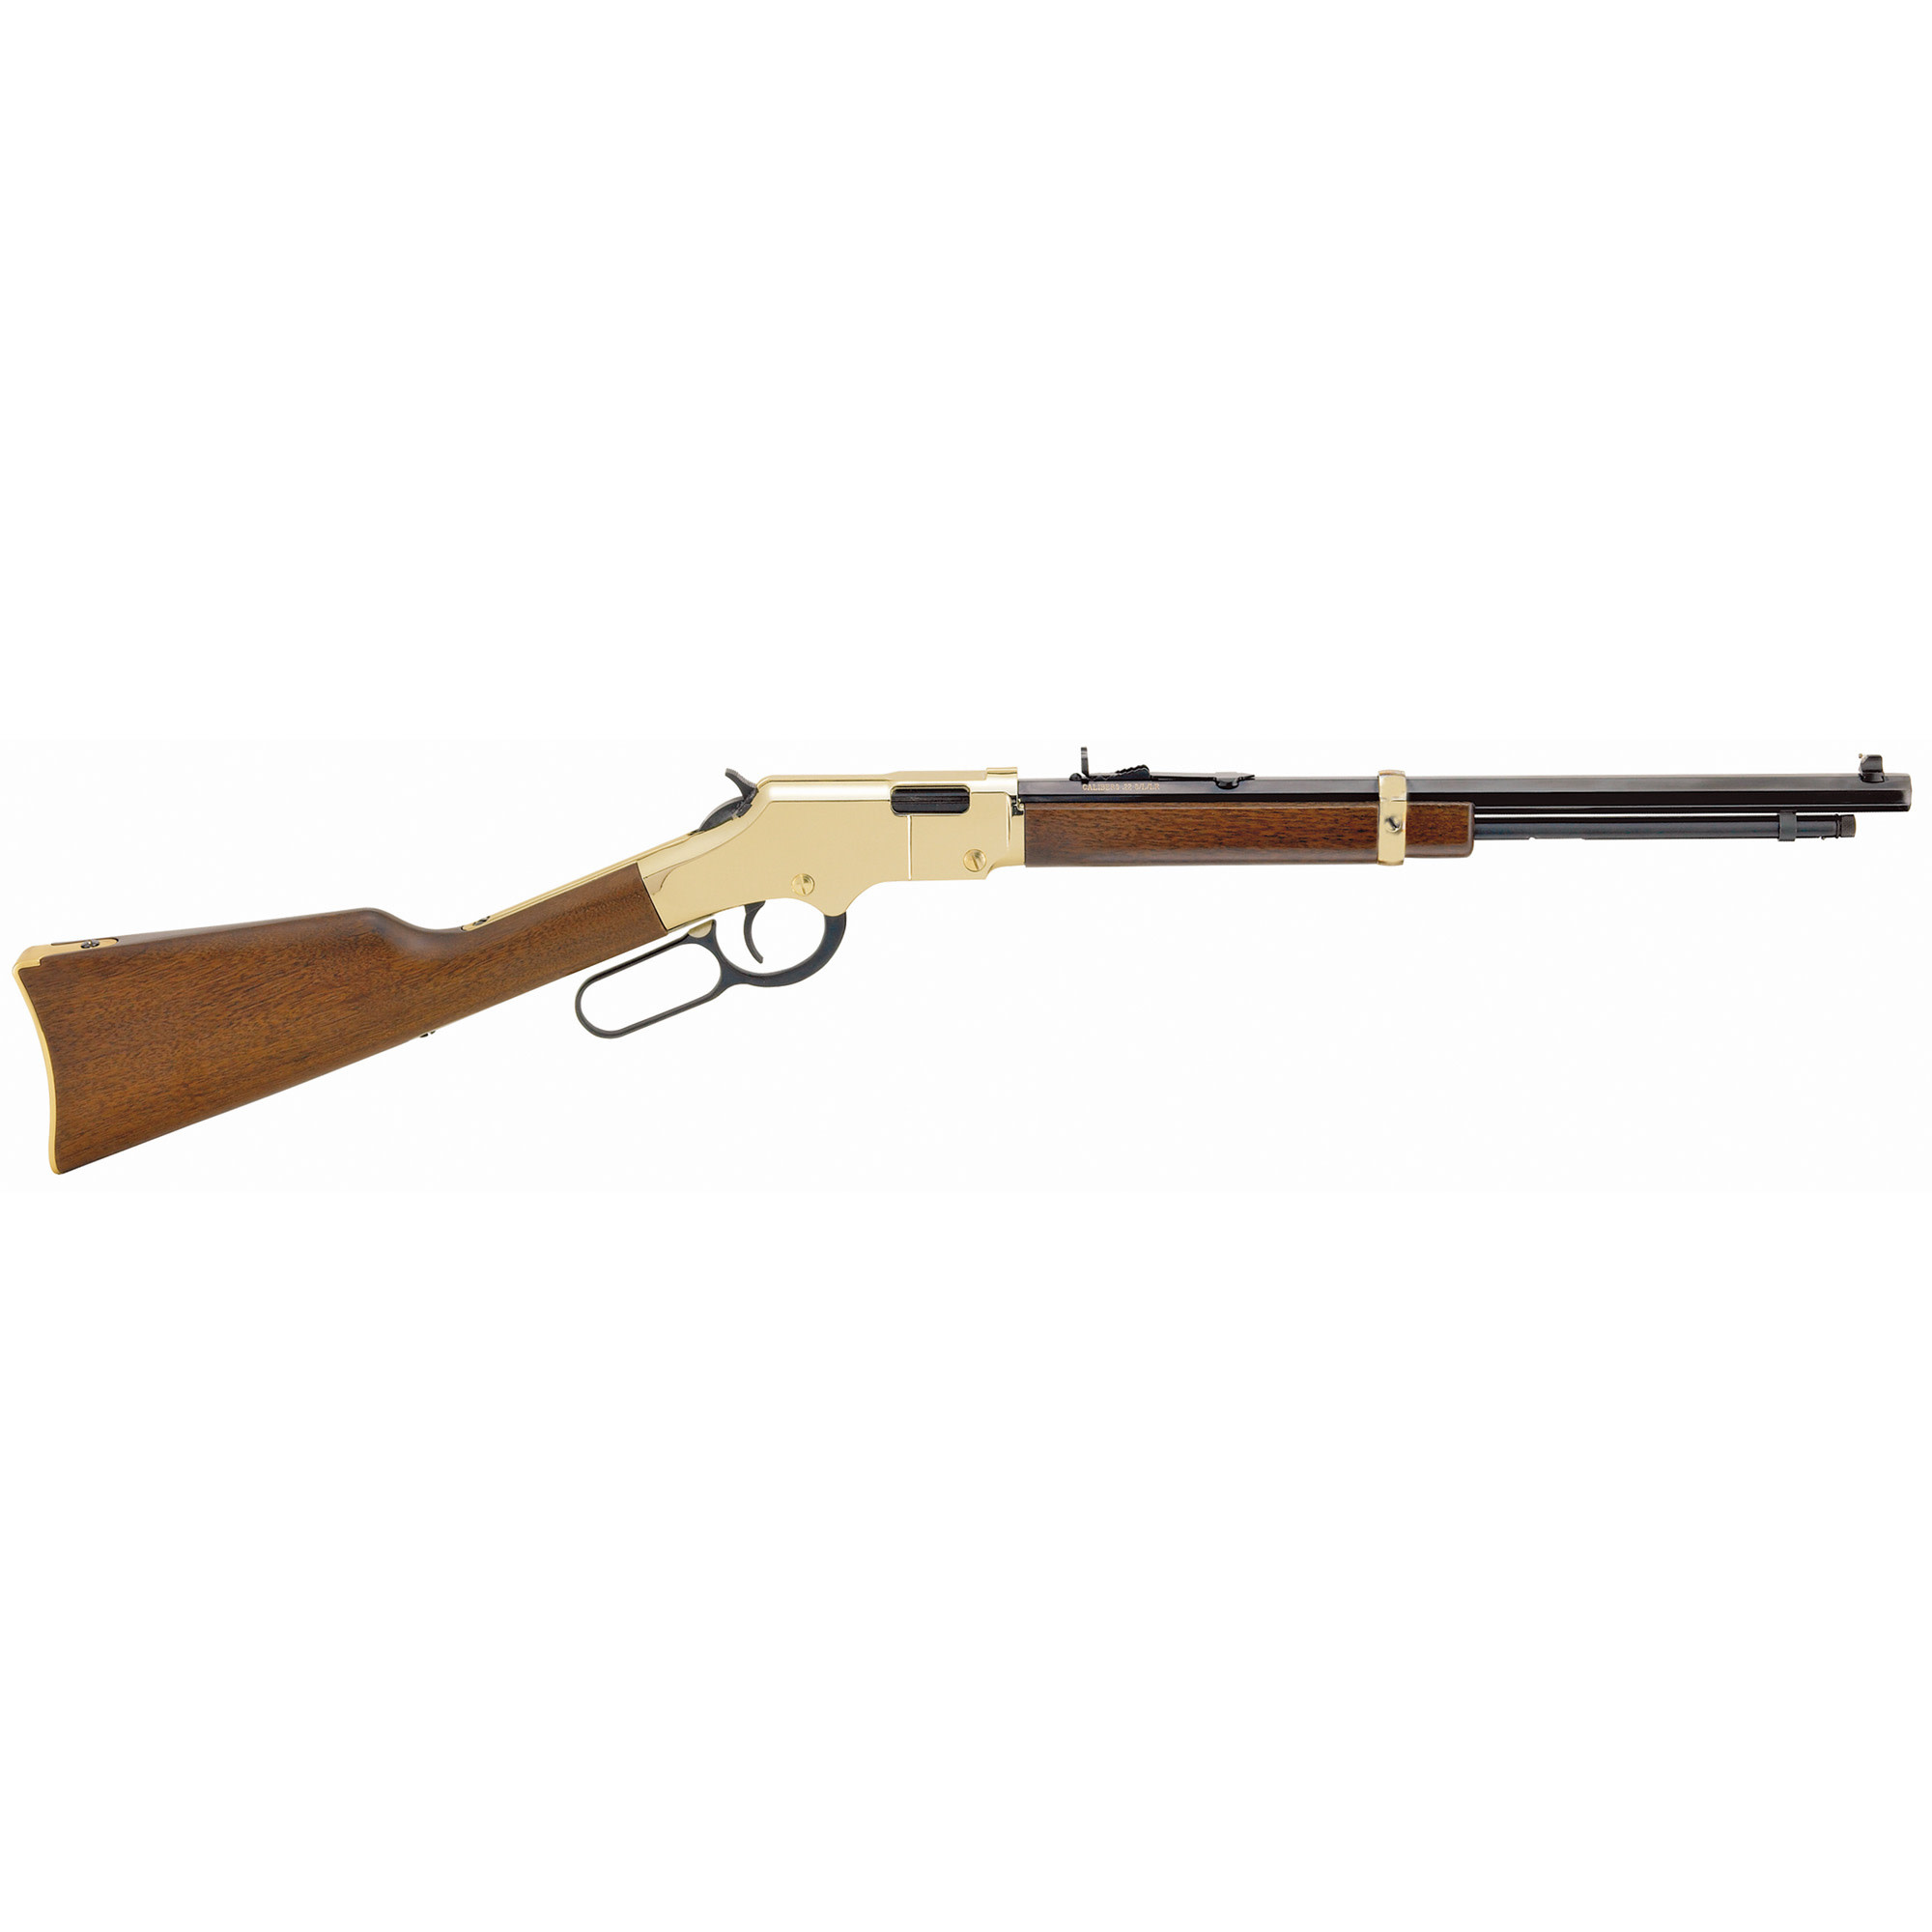 Henry Repeating Arms, Golden Boy, 22 LR, 17" Brass/Walnut Rifle